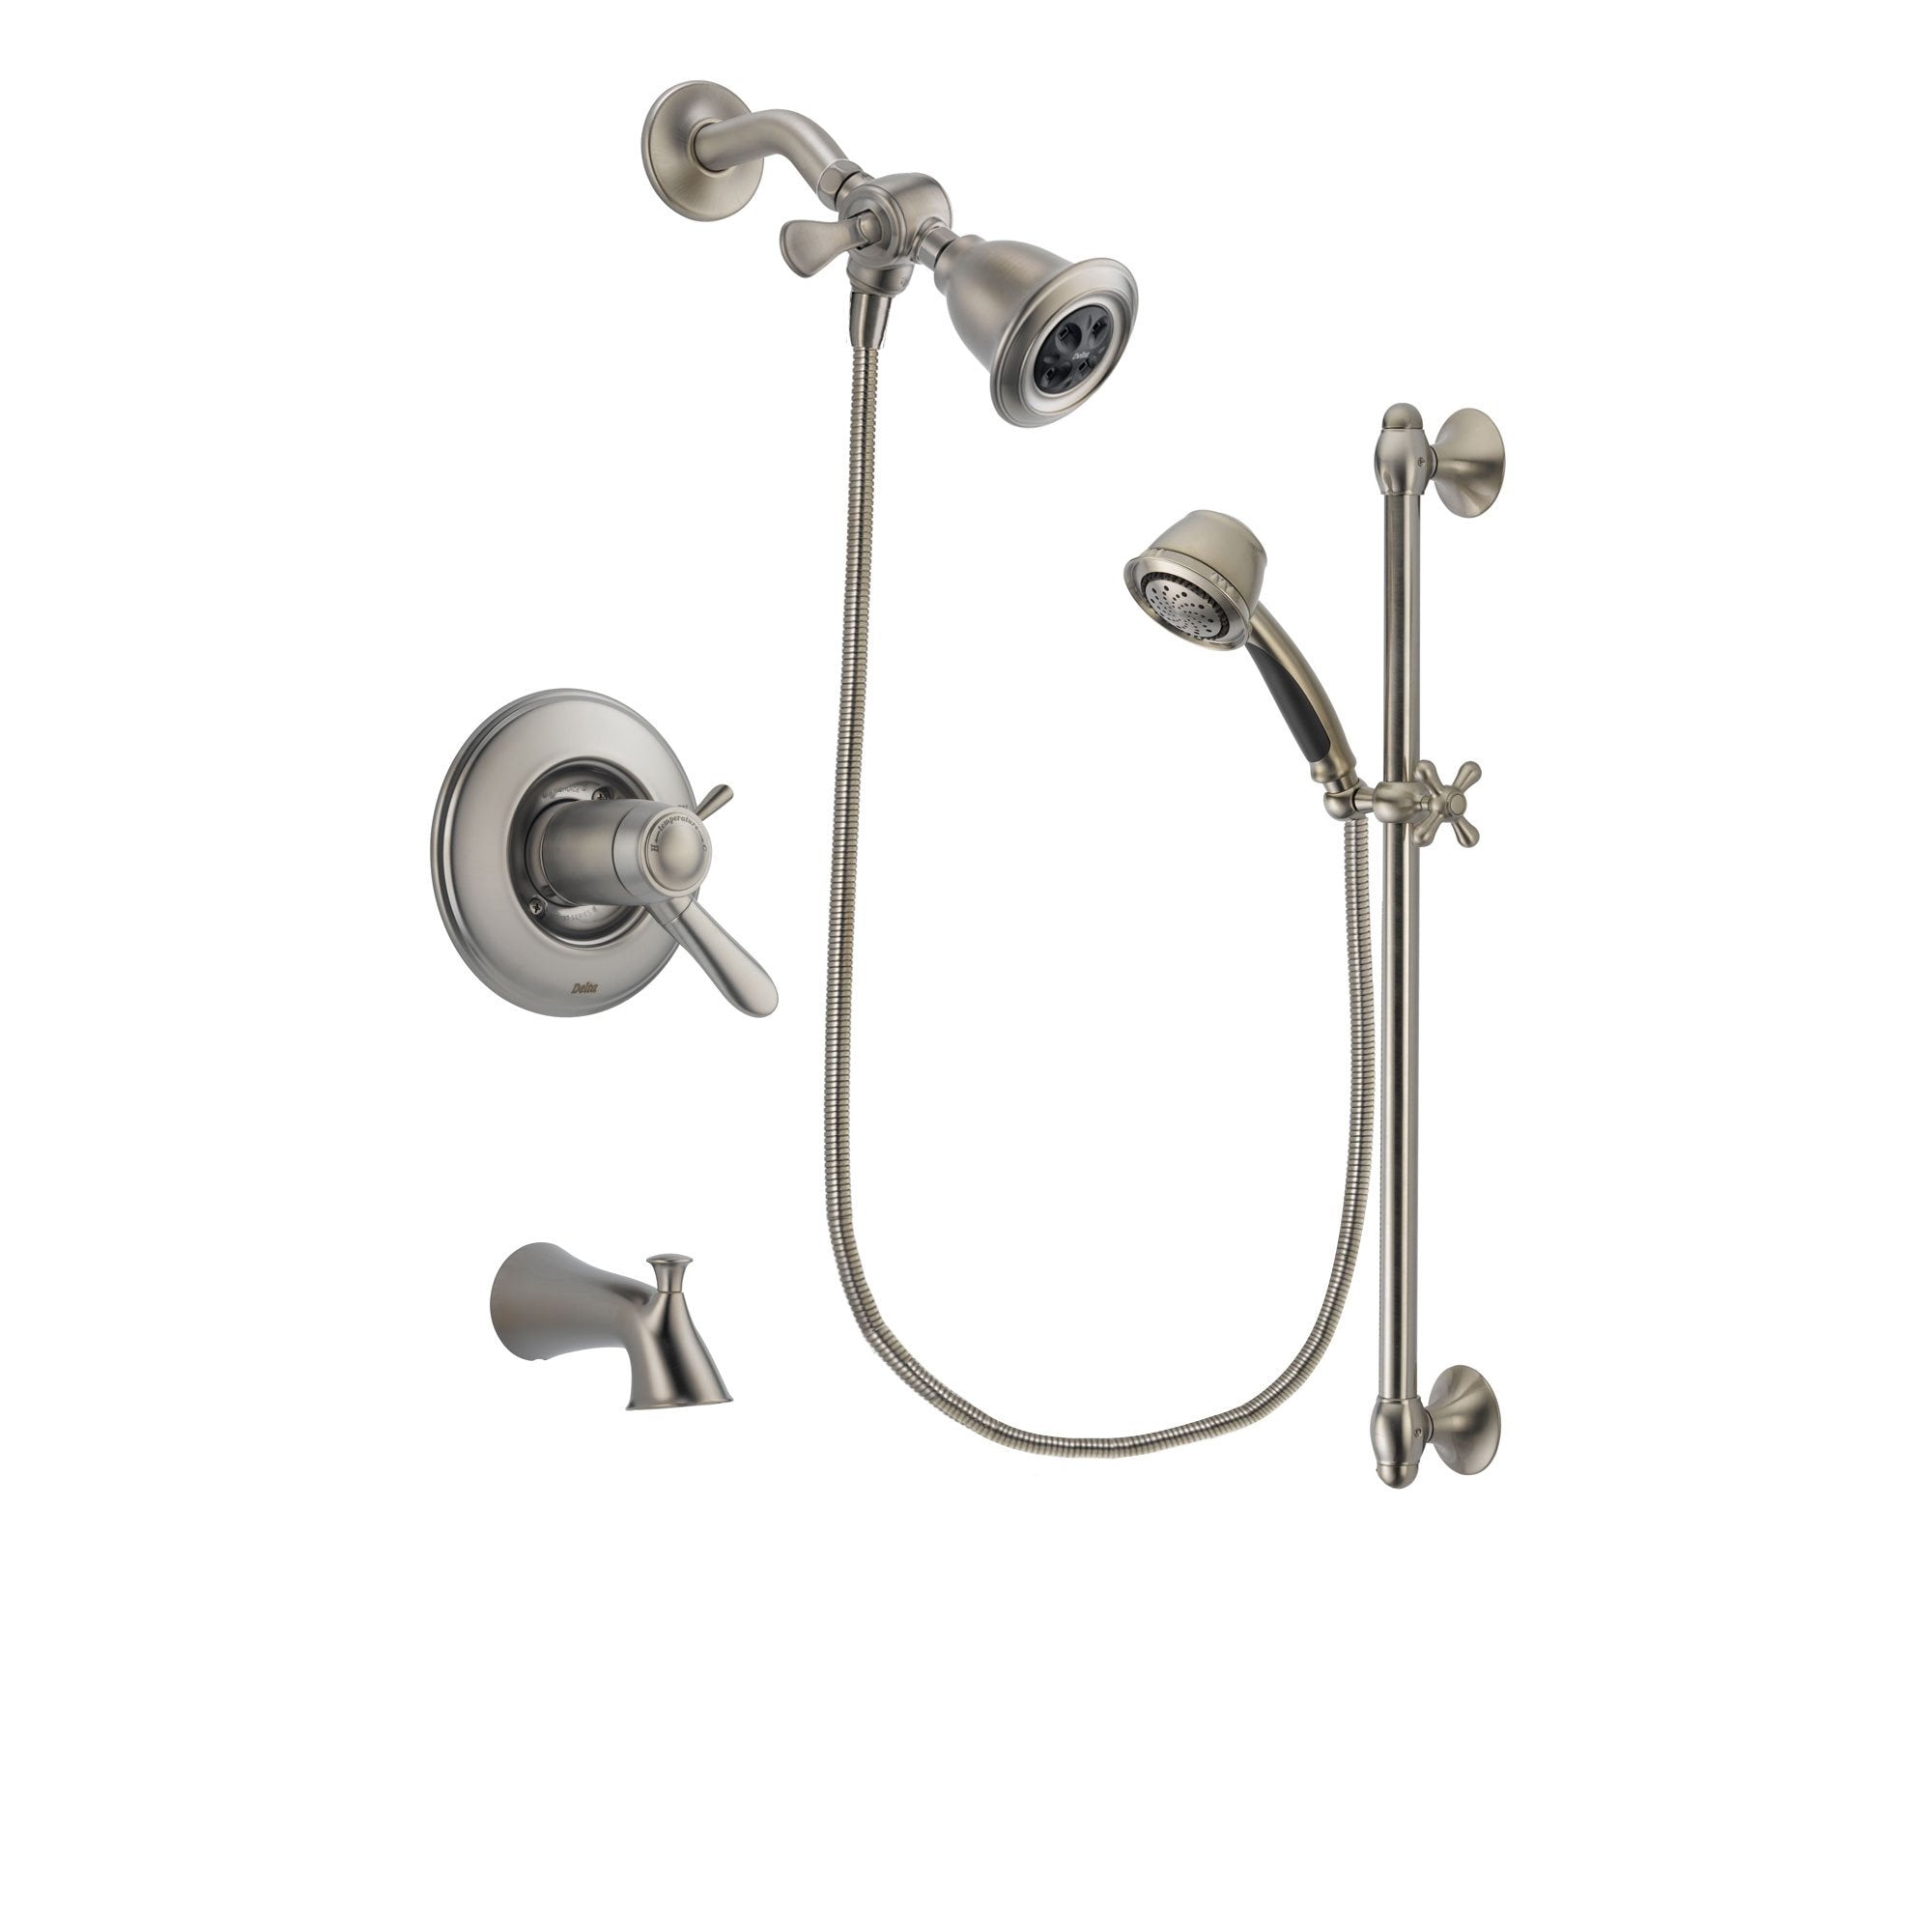 Delta Lahara Stainless Steel Finish Thermostatic Tub and Shower Faucet System Package with Water Efficient Showerhead and 5-Spray Personal Handshower with Slide Bar Includes Rough-in Valve and Tub Spout DSP1275V